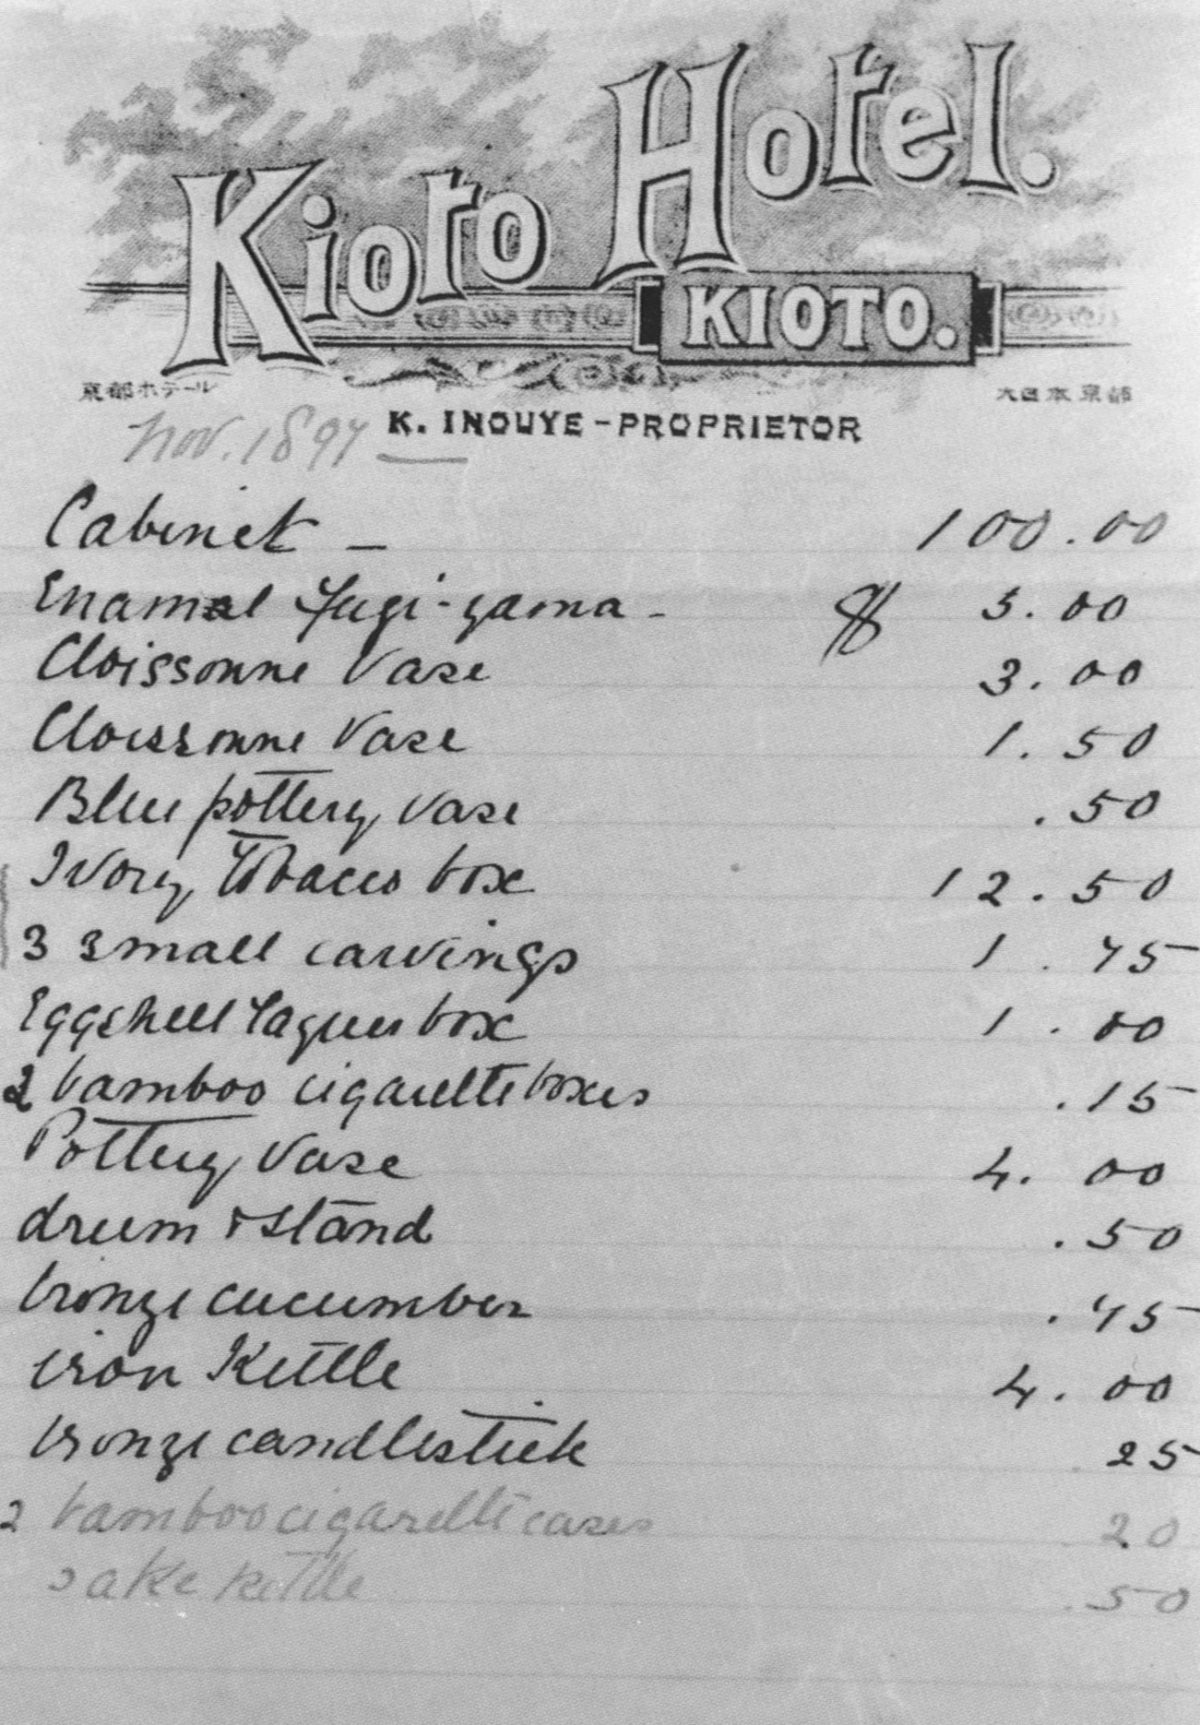 The Japanese gourd-shaped hanging vase is listed as “bronze cucumber” near the bottom of this handwritten list of objects, itemizing the cost of each, bought by the Harris family while travelling in Japan in 1897.  Dated November 1897 it appears to be written on “Kioto Hotel’ notepaper. Harris family fonds, Archives, Western University.